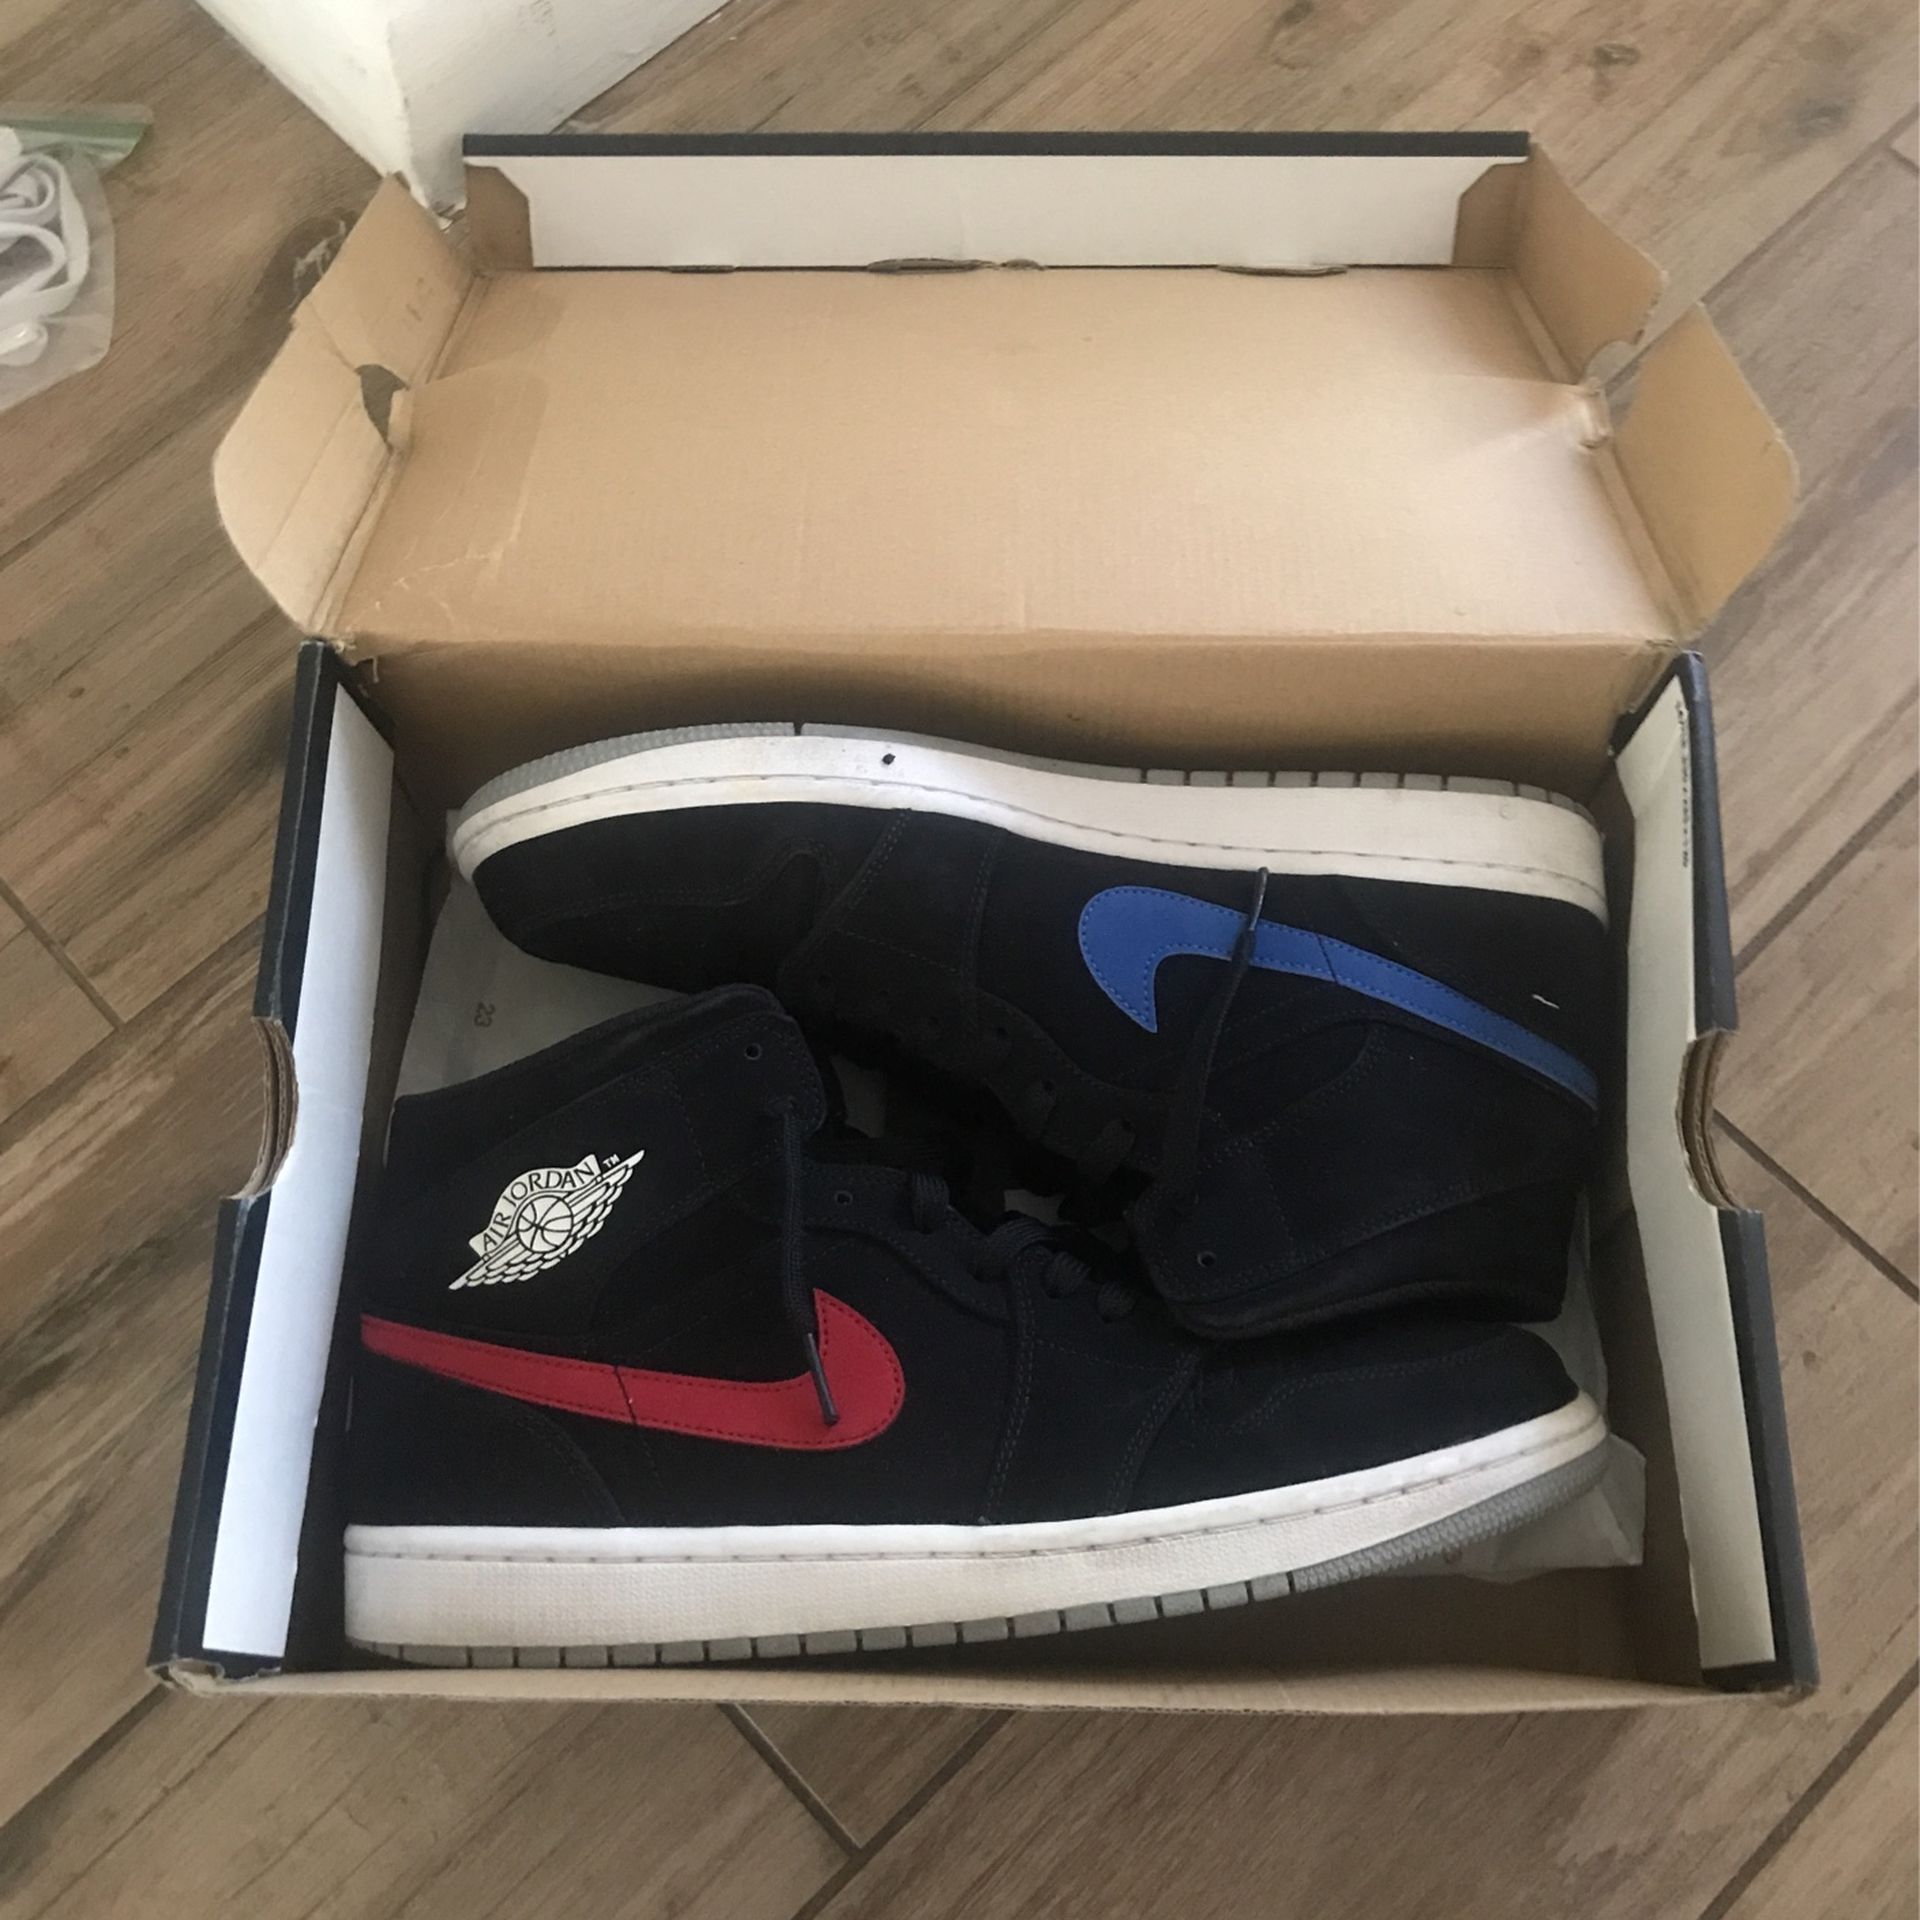 Jordan 1 Size 10.5 for Sale in Laud Lakes, FL - OfferUp